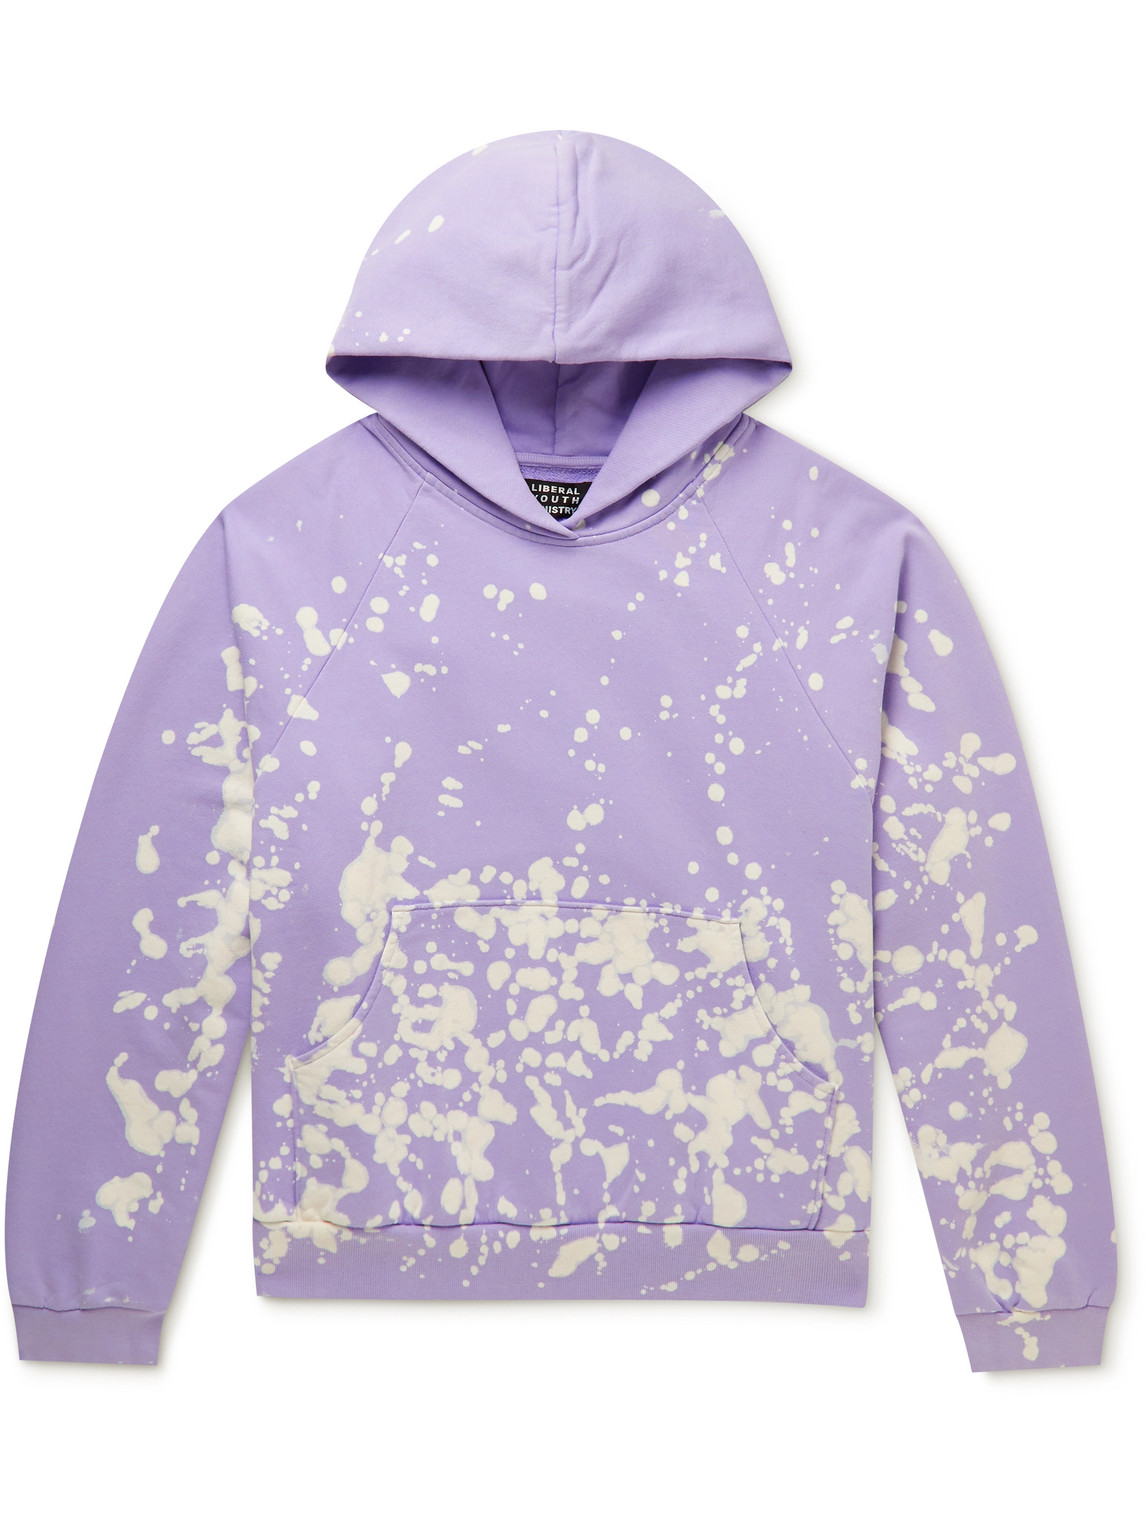 LIBERAL YOUTH MINISTRY BLEACHED COTTON-JERSEY HOODIE